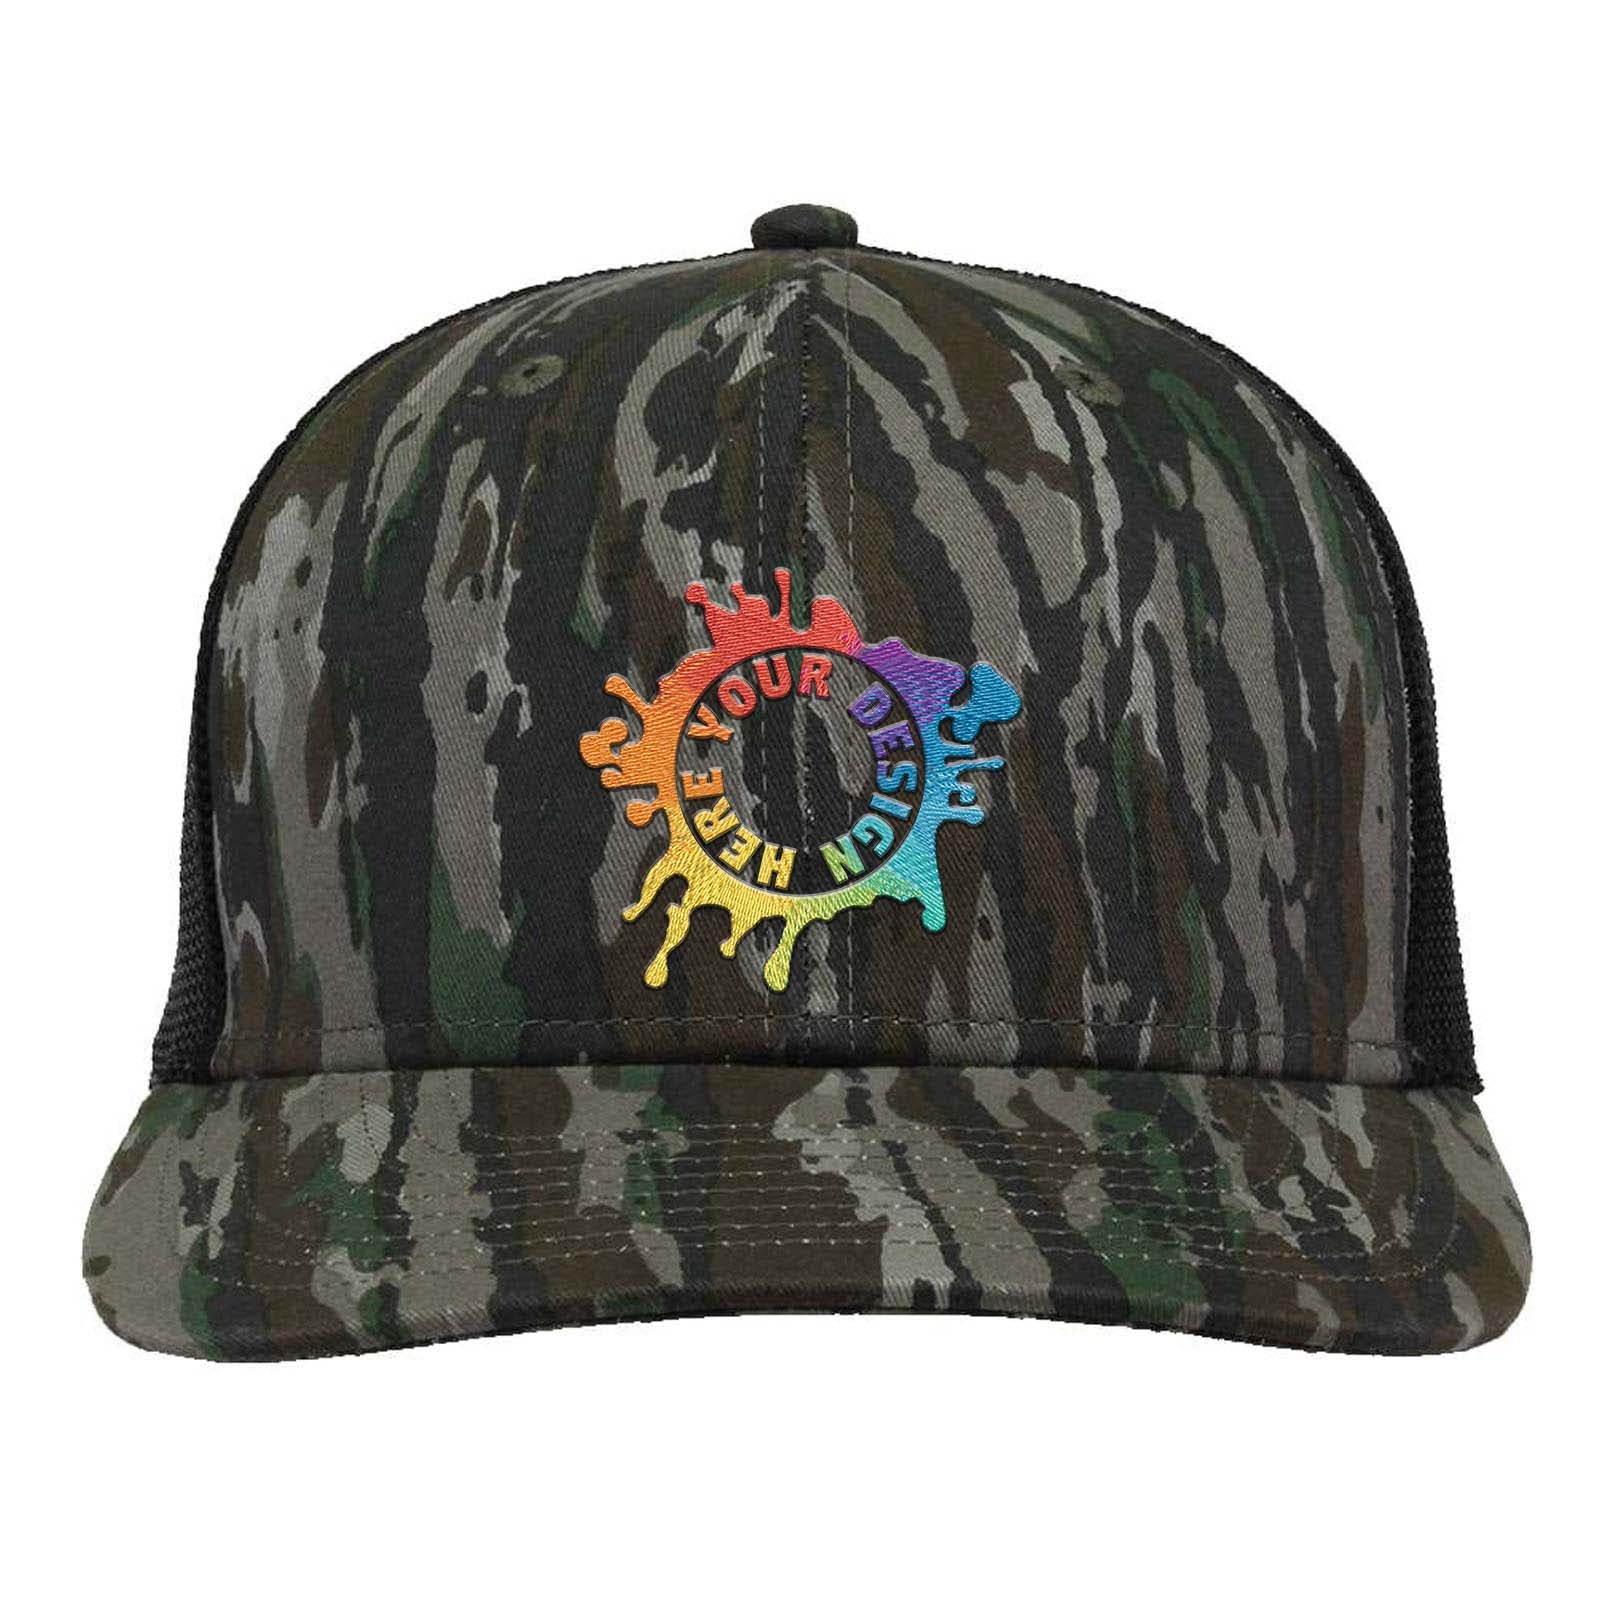 Embroidered The Game Everyday Camo Trucker Cap - Mato & Hash